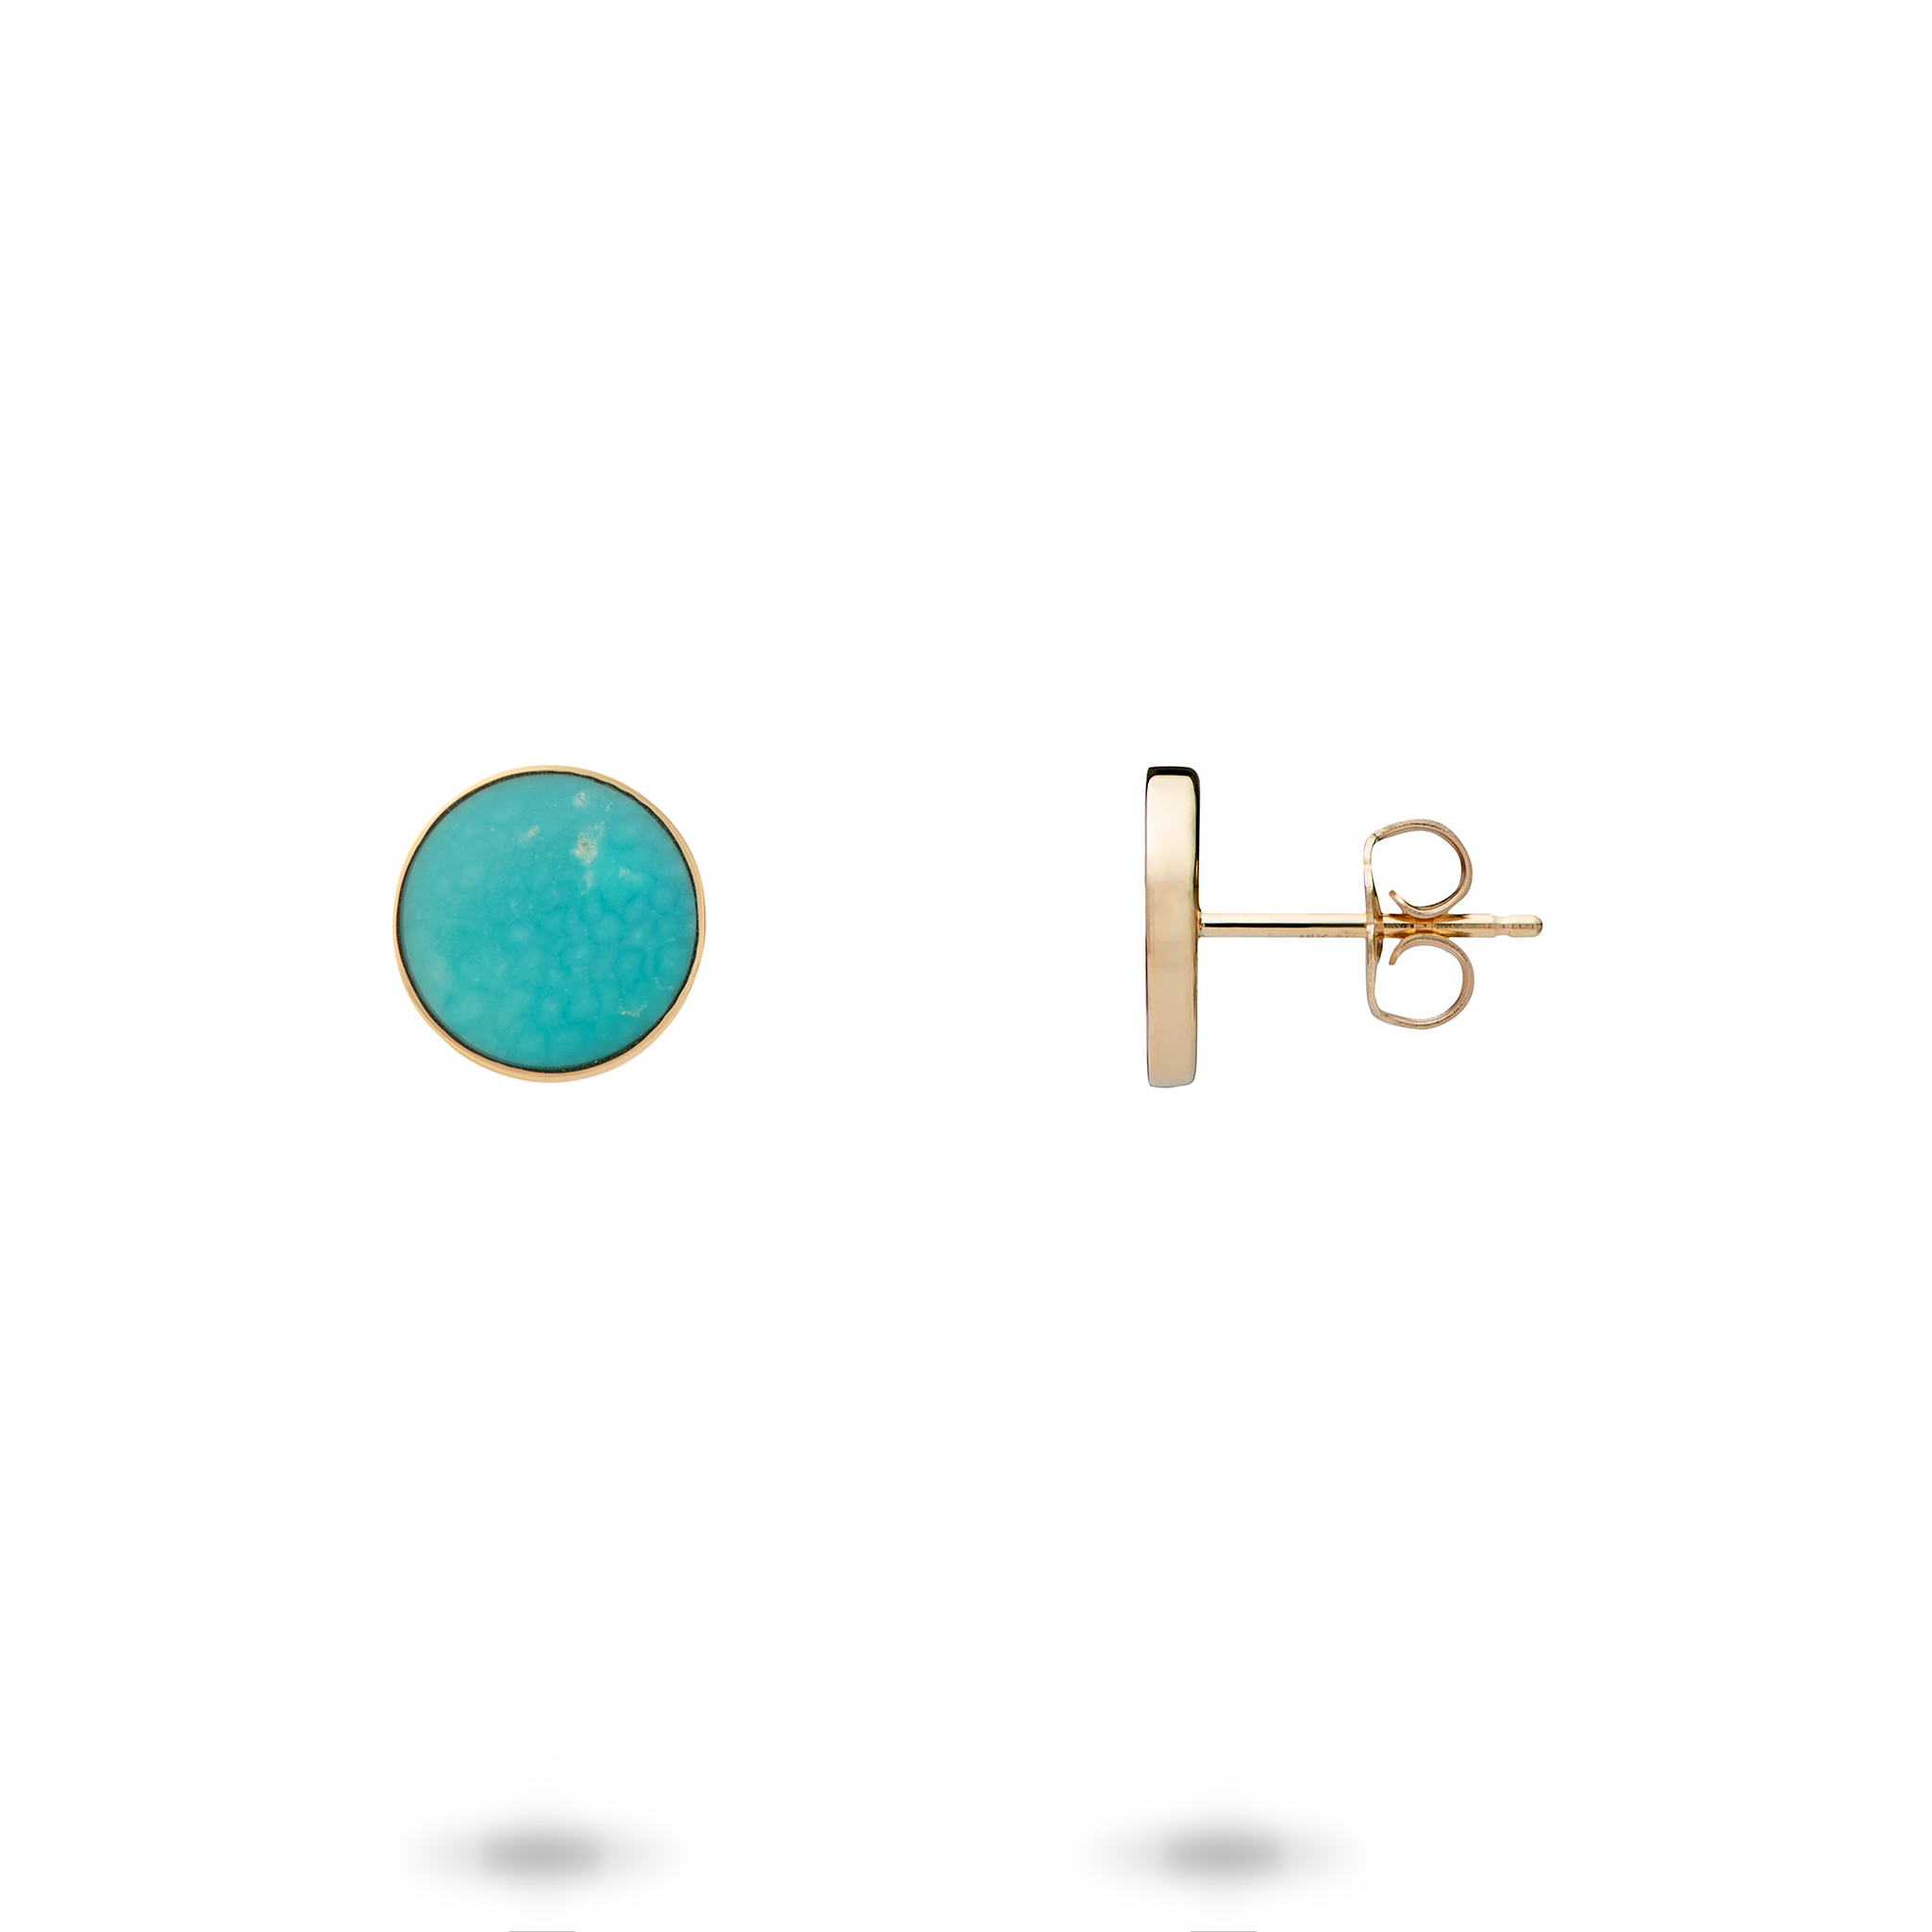 Eclipse Turquoise Earrings in Gold - 9mm